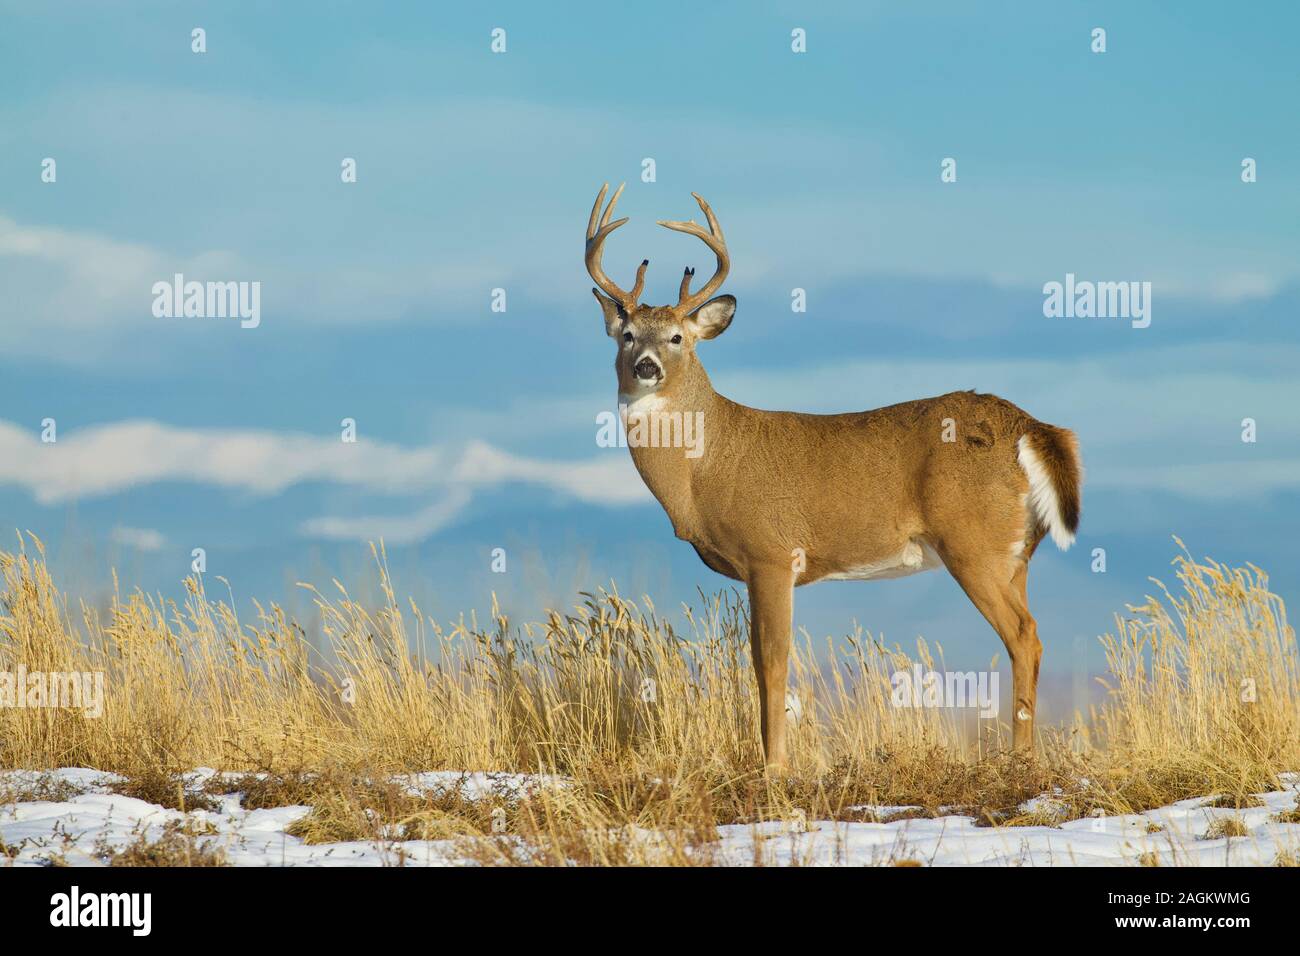 Whitetail Buck Deer environmental portrait with a natural backdrop of snow-capped mountains Stock Photo